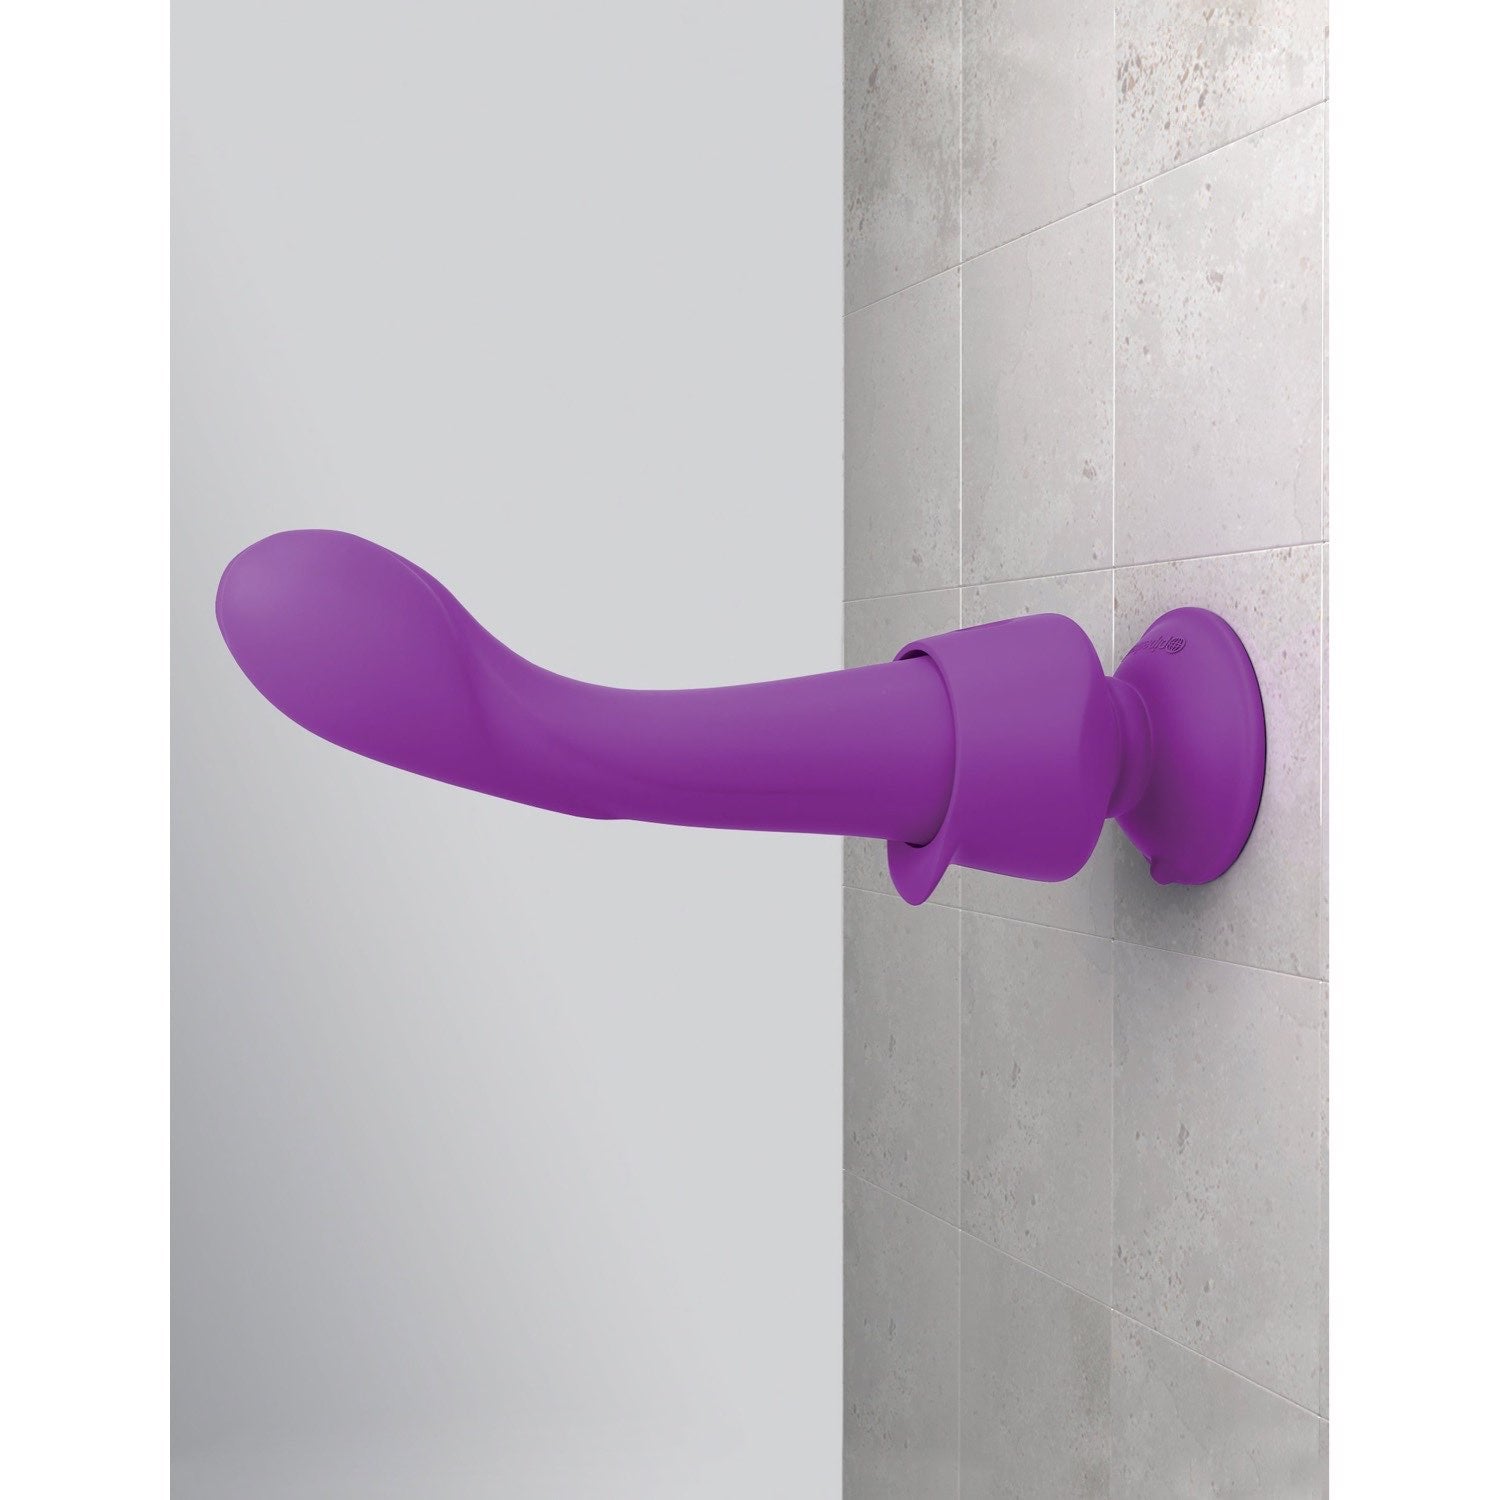 3Some Wall Banger G - Purple USB Rechargeable Vibrator with Wireless Remote by Pipedream